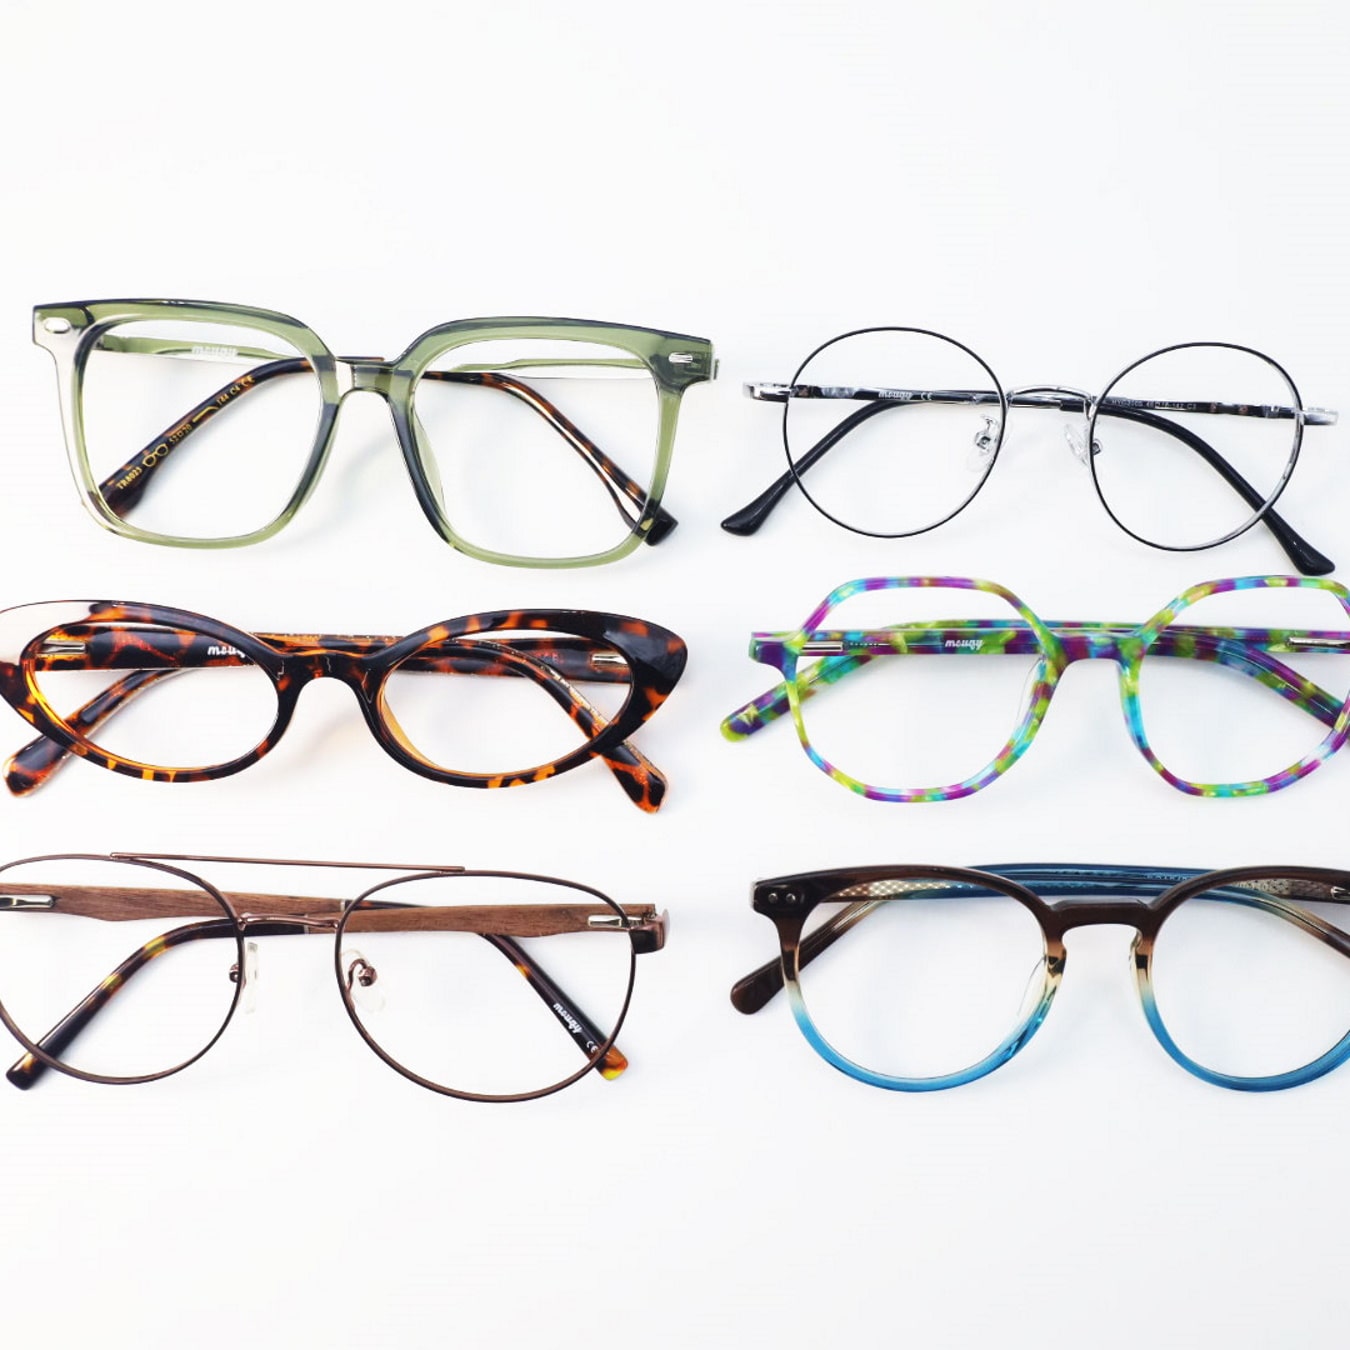 6 pairs of glasses in assorted styles